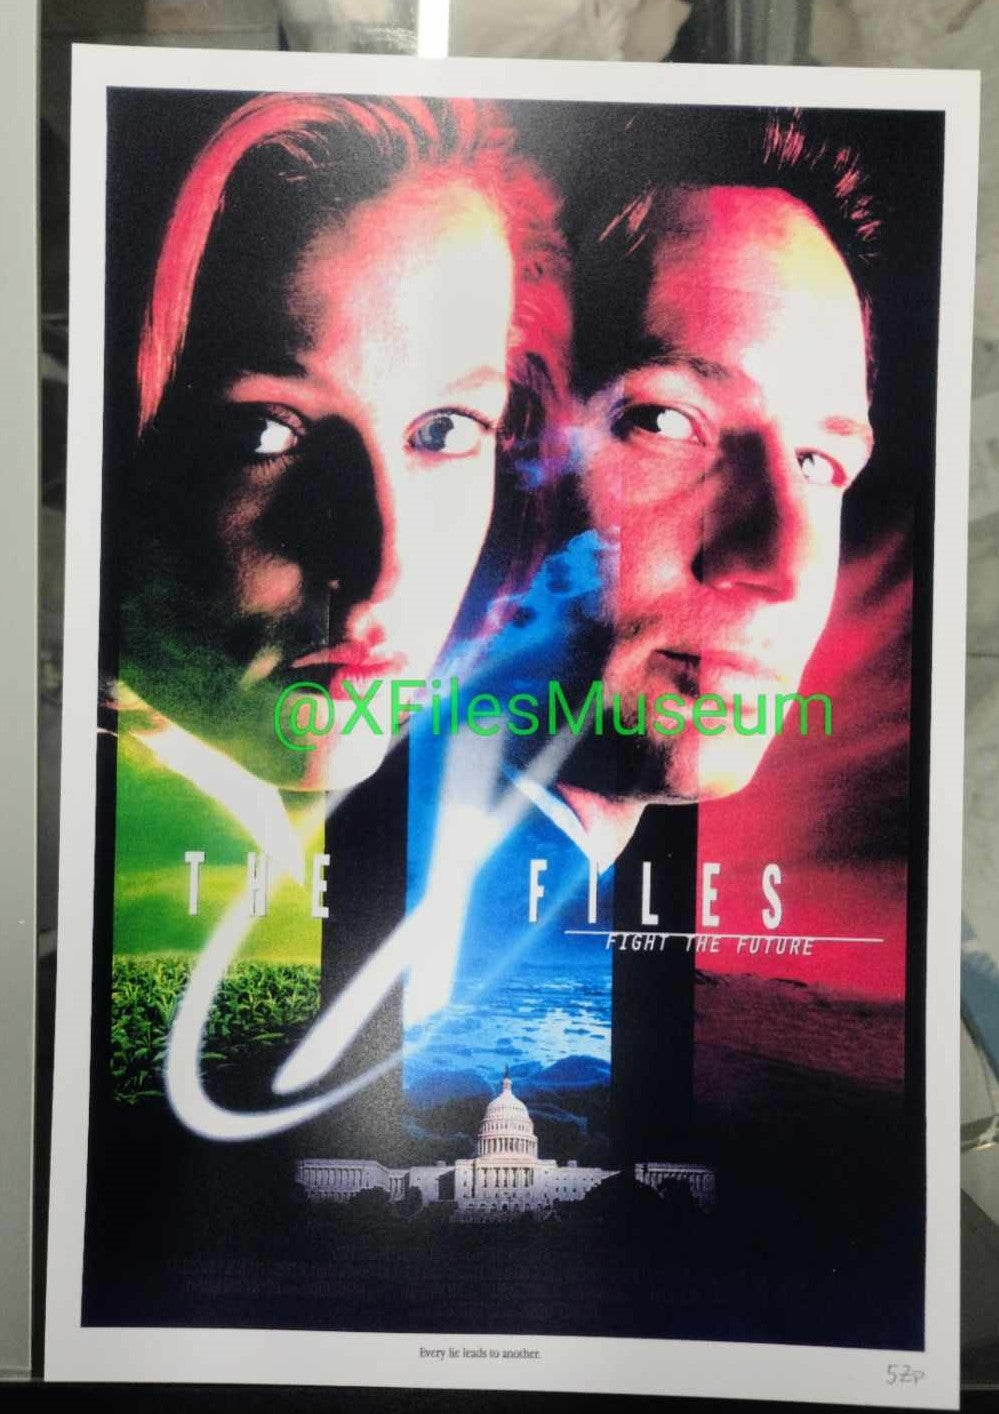 The X-Files FIGHT THE FUTURE Concept Art Print 13" x 19" Poster Print - 58